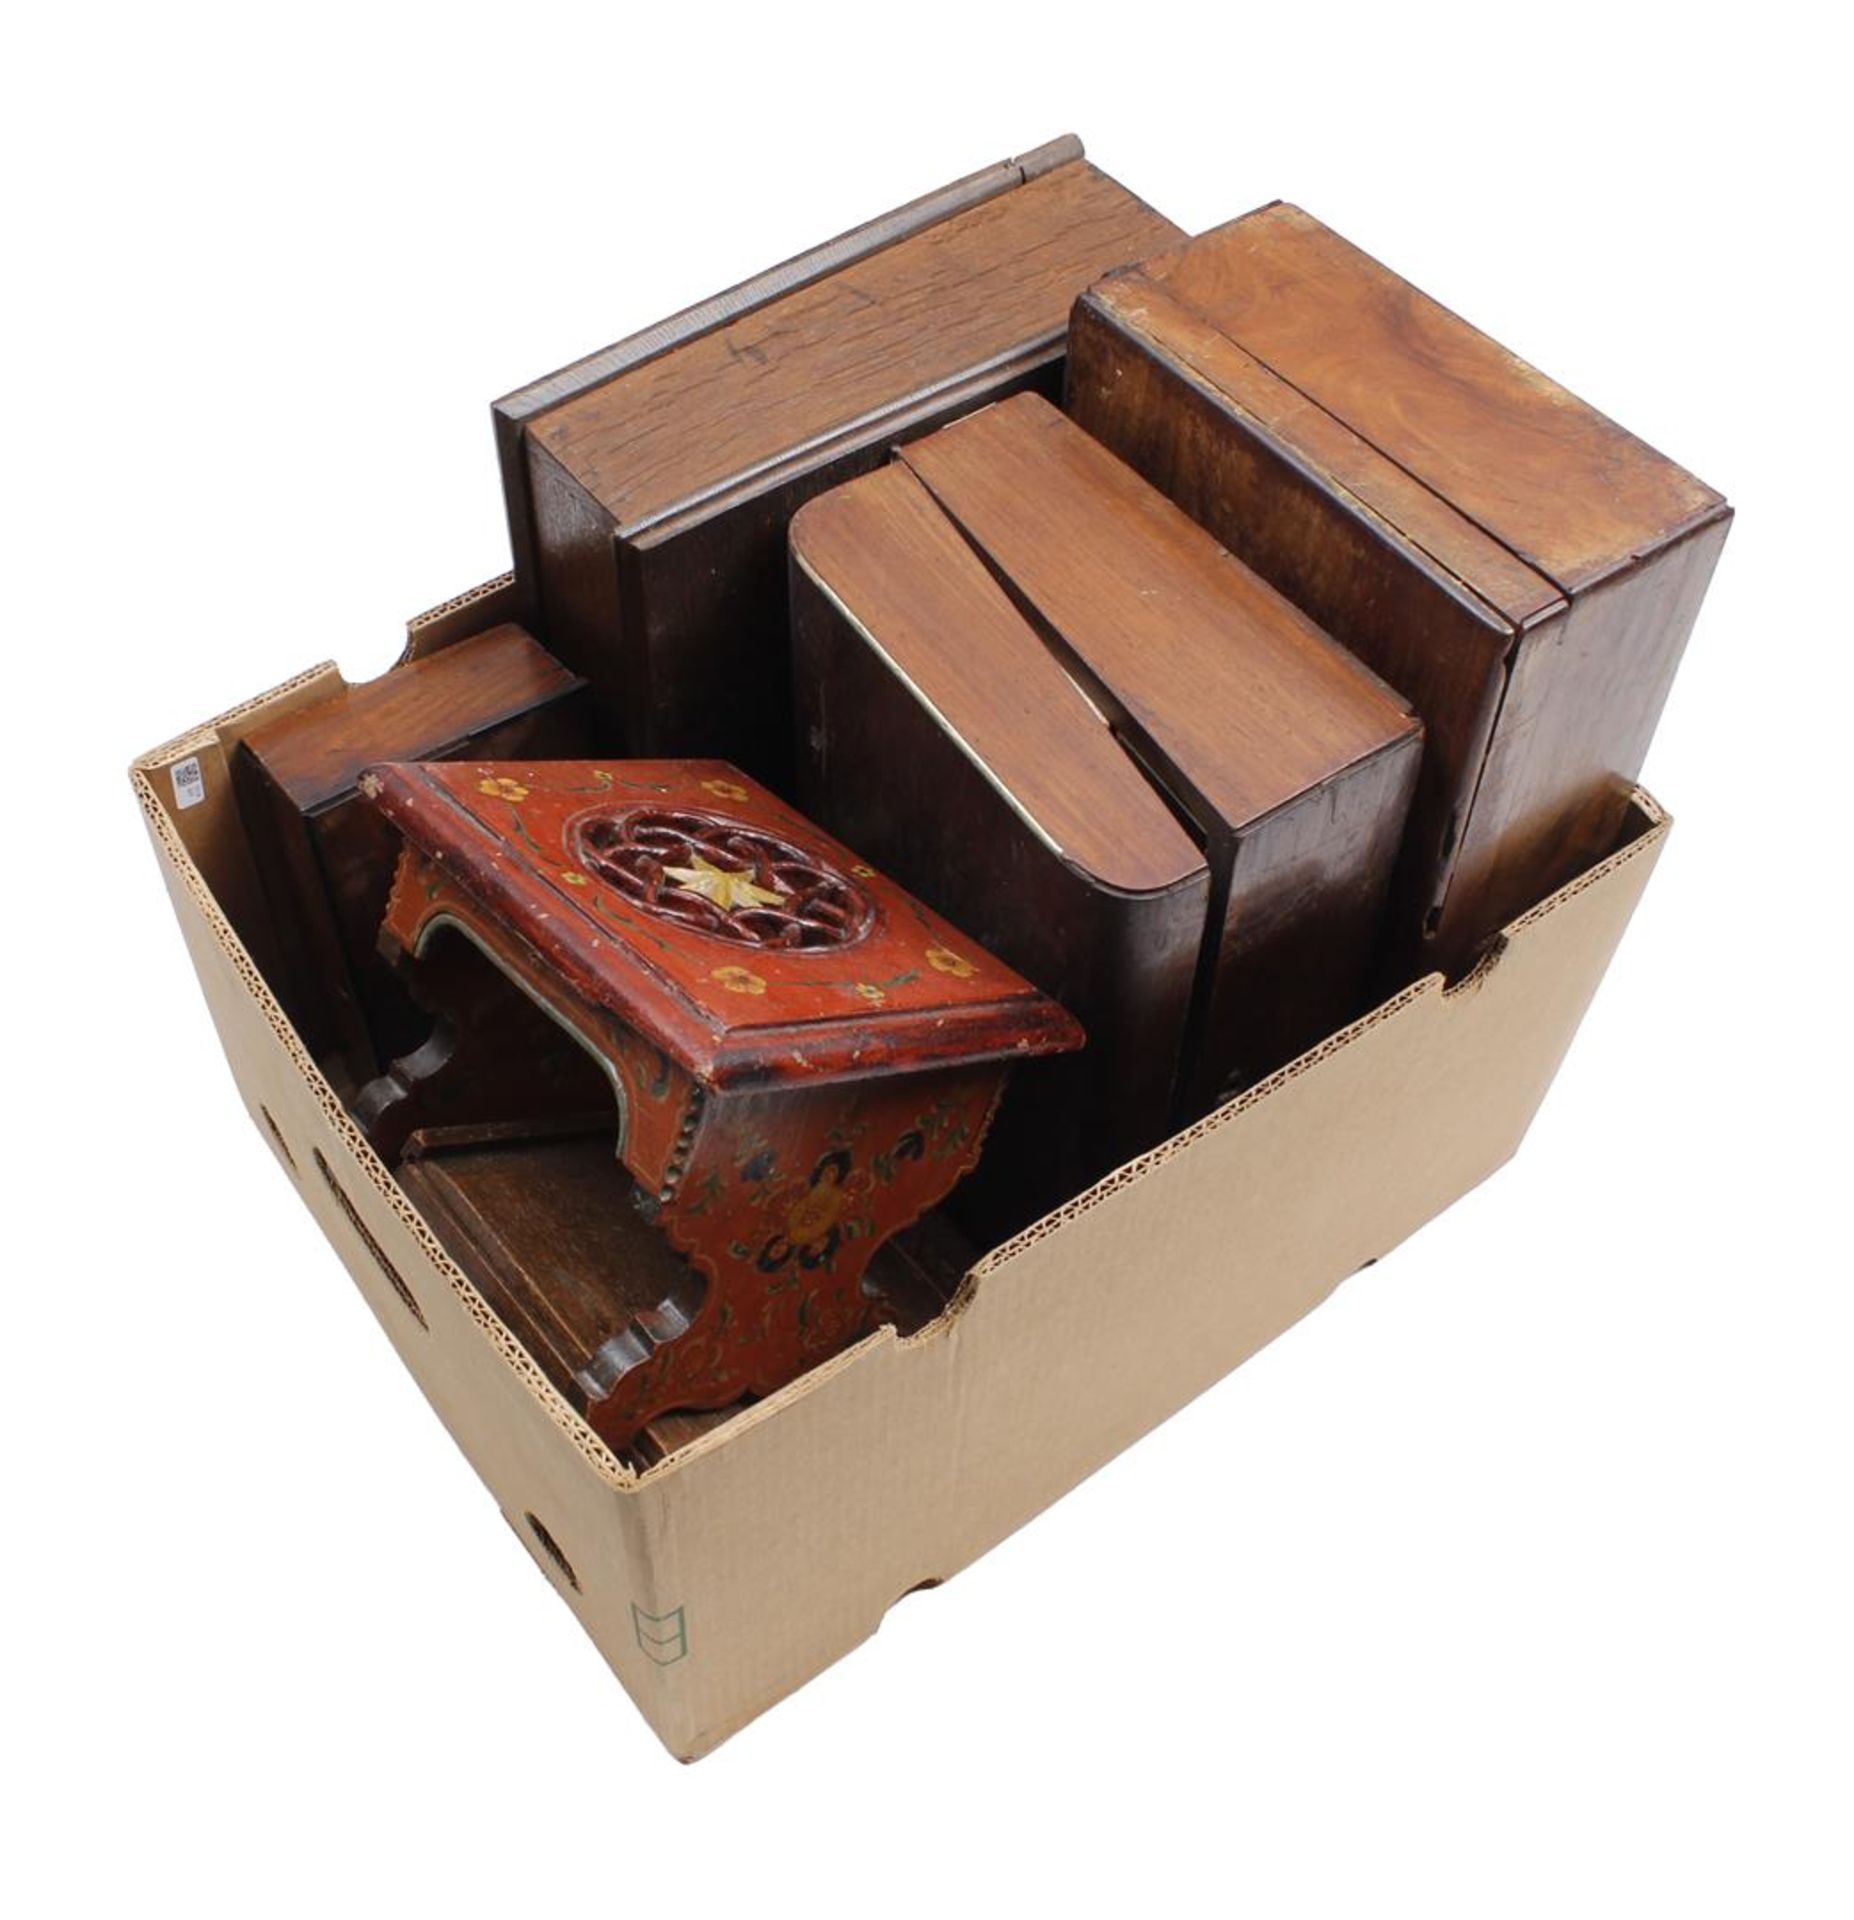 Lot various wooden boxes